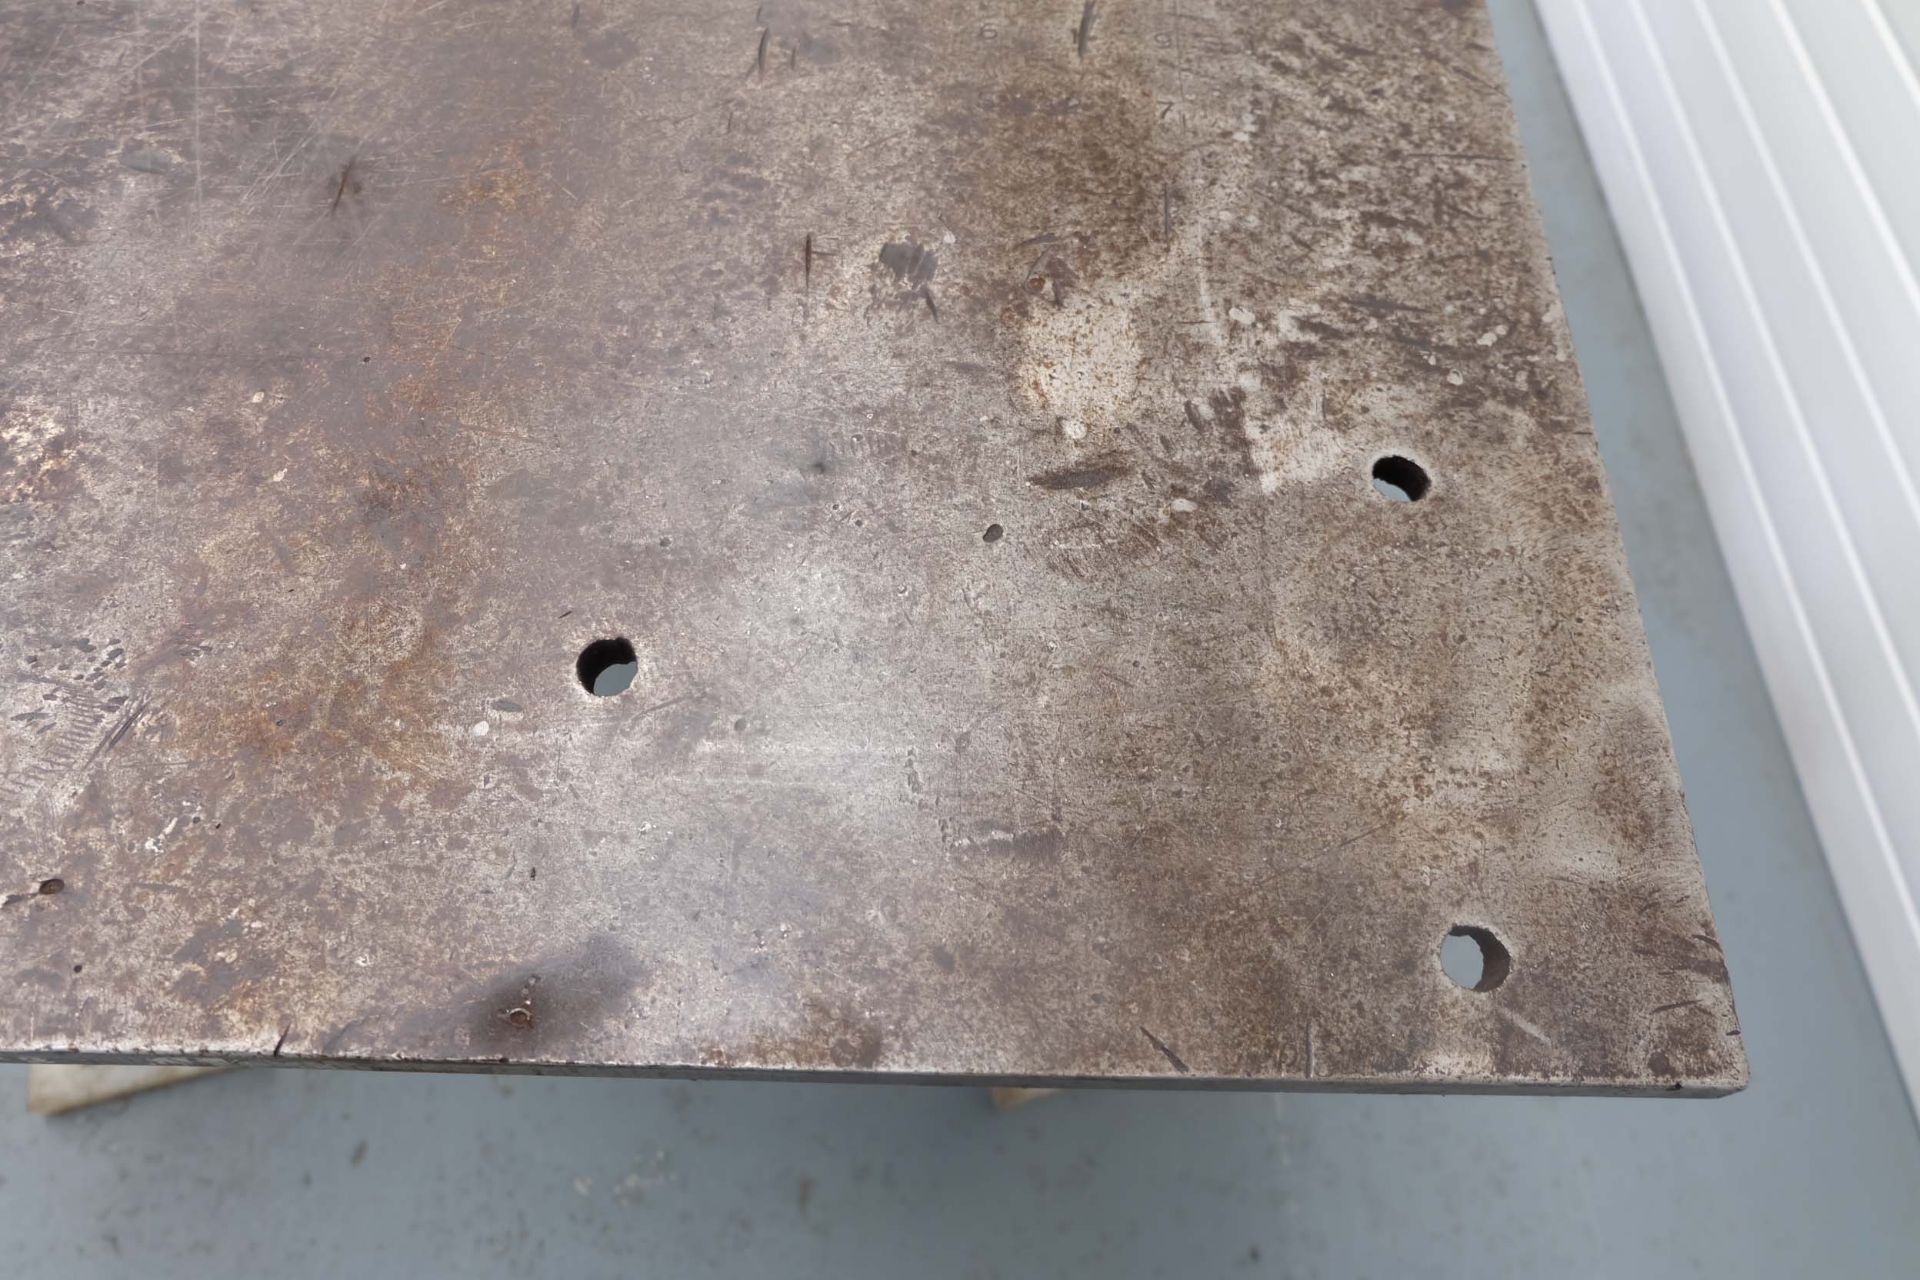 Steel Table For Welding Etc. Size 6' x 4. Thickness 3/4". Work Height 36". - Image 5 of 5